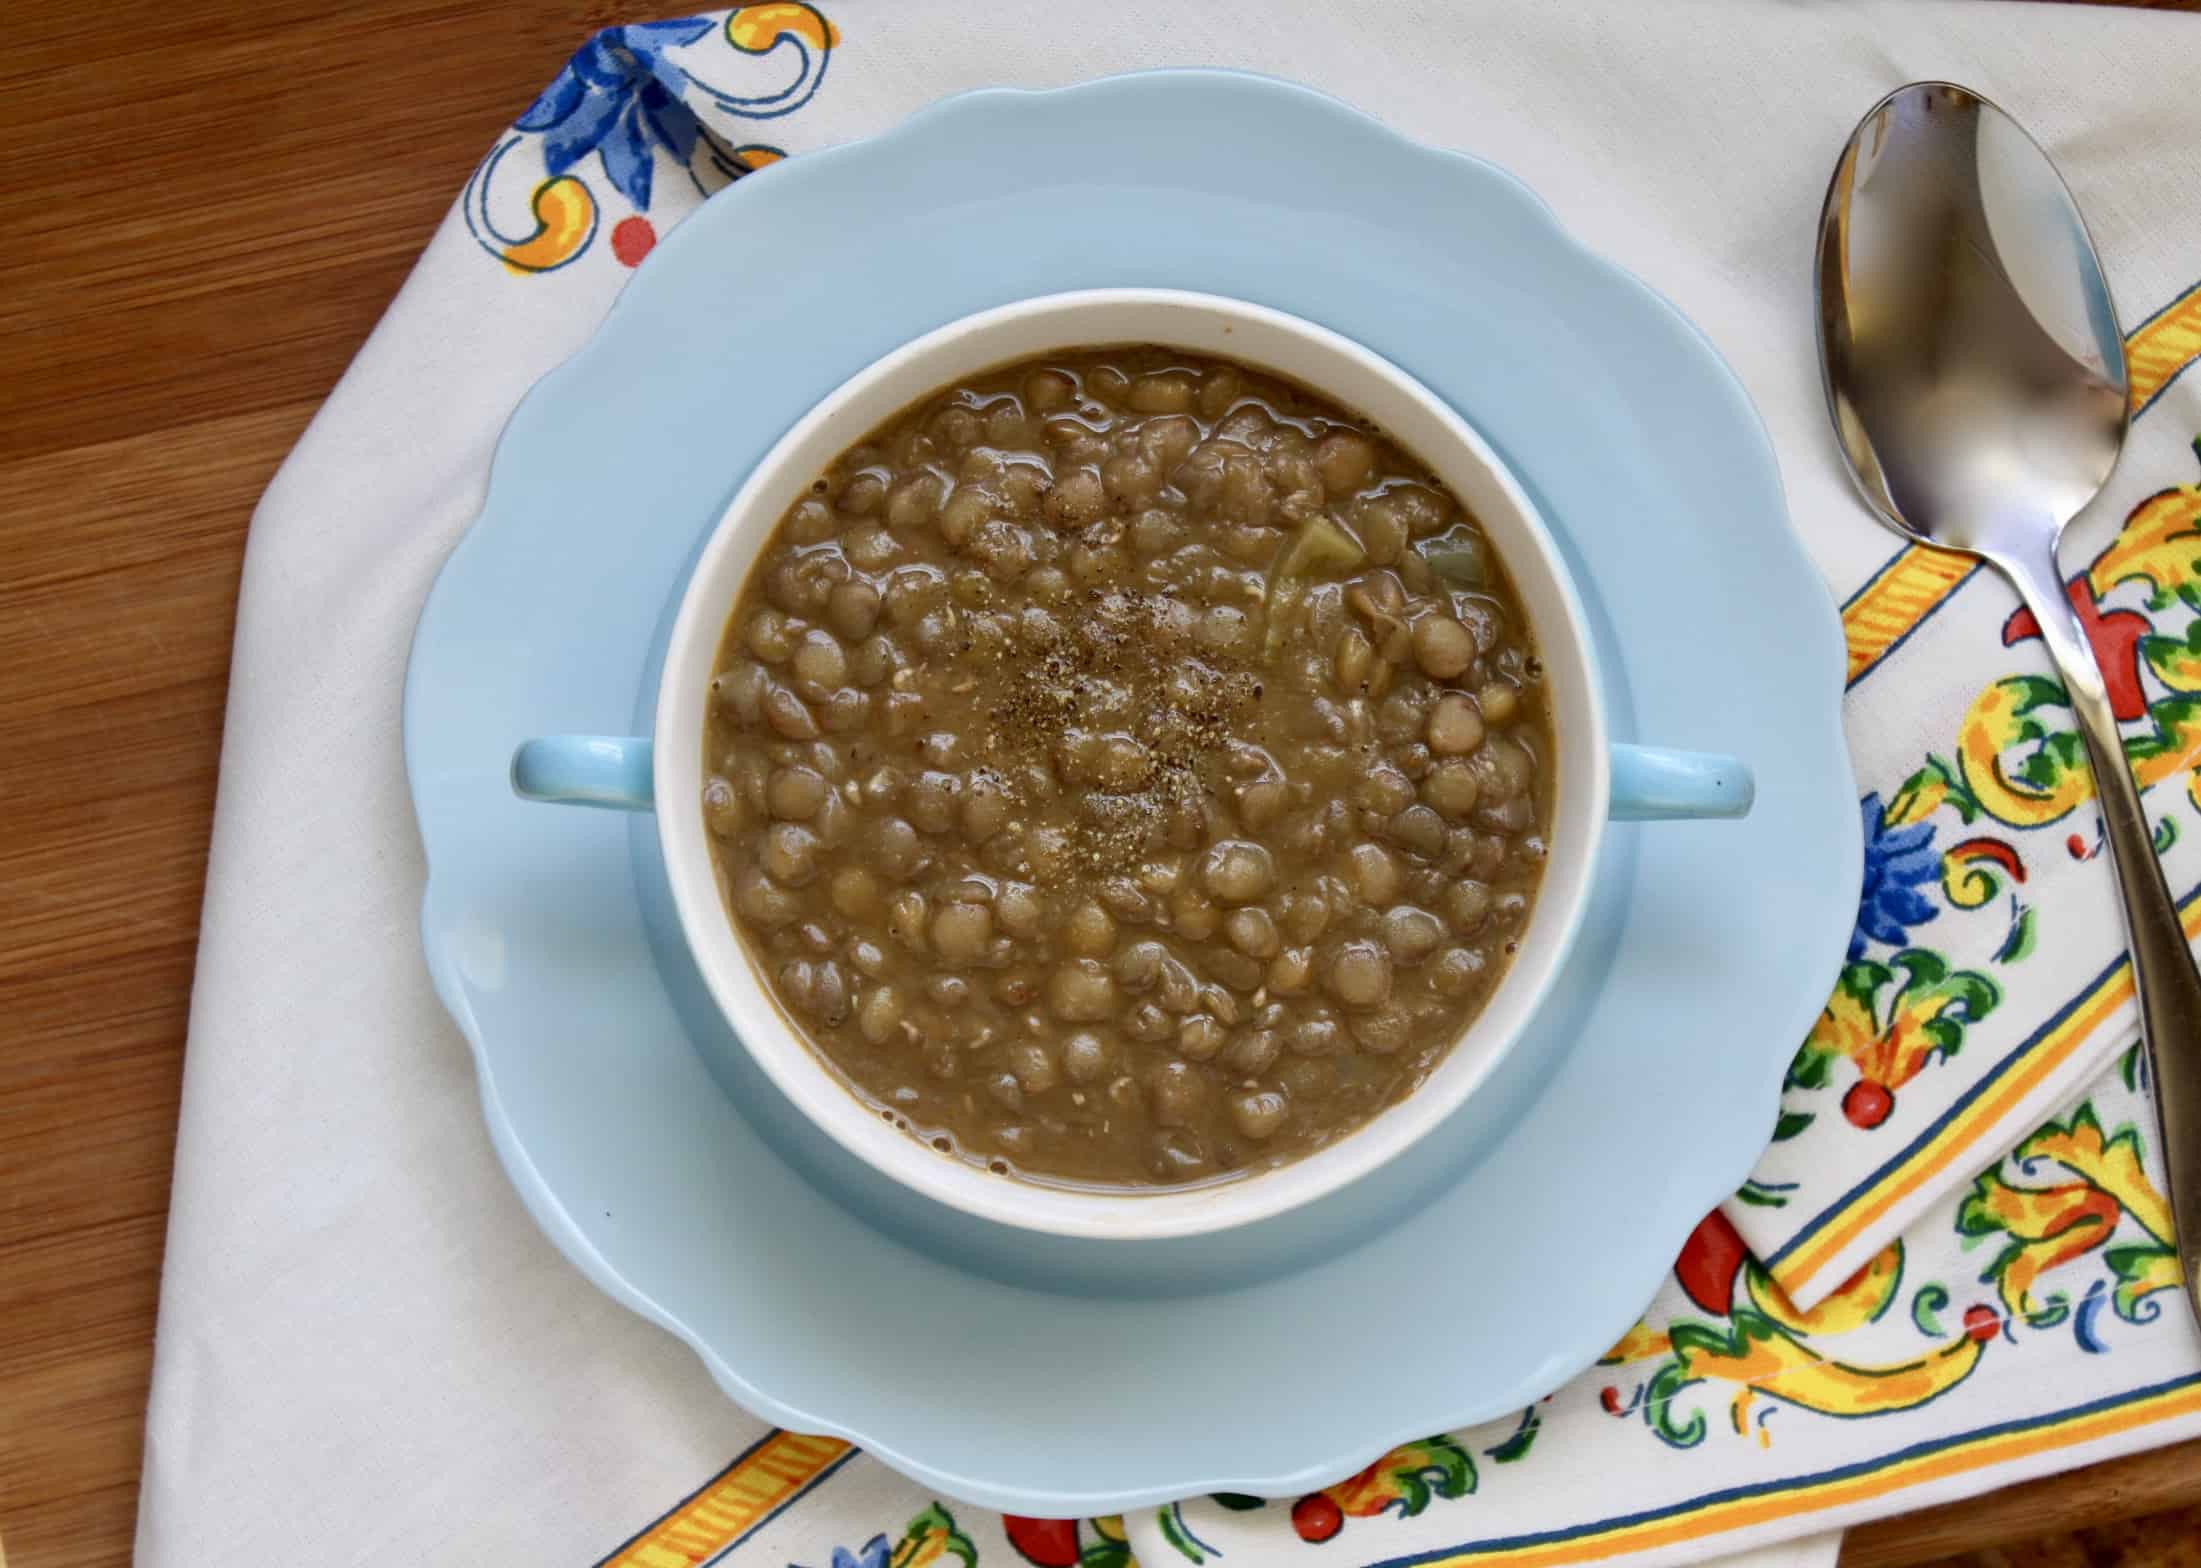 5 Minute Lentil Soup in a bowl with a blue saucer